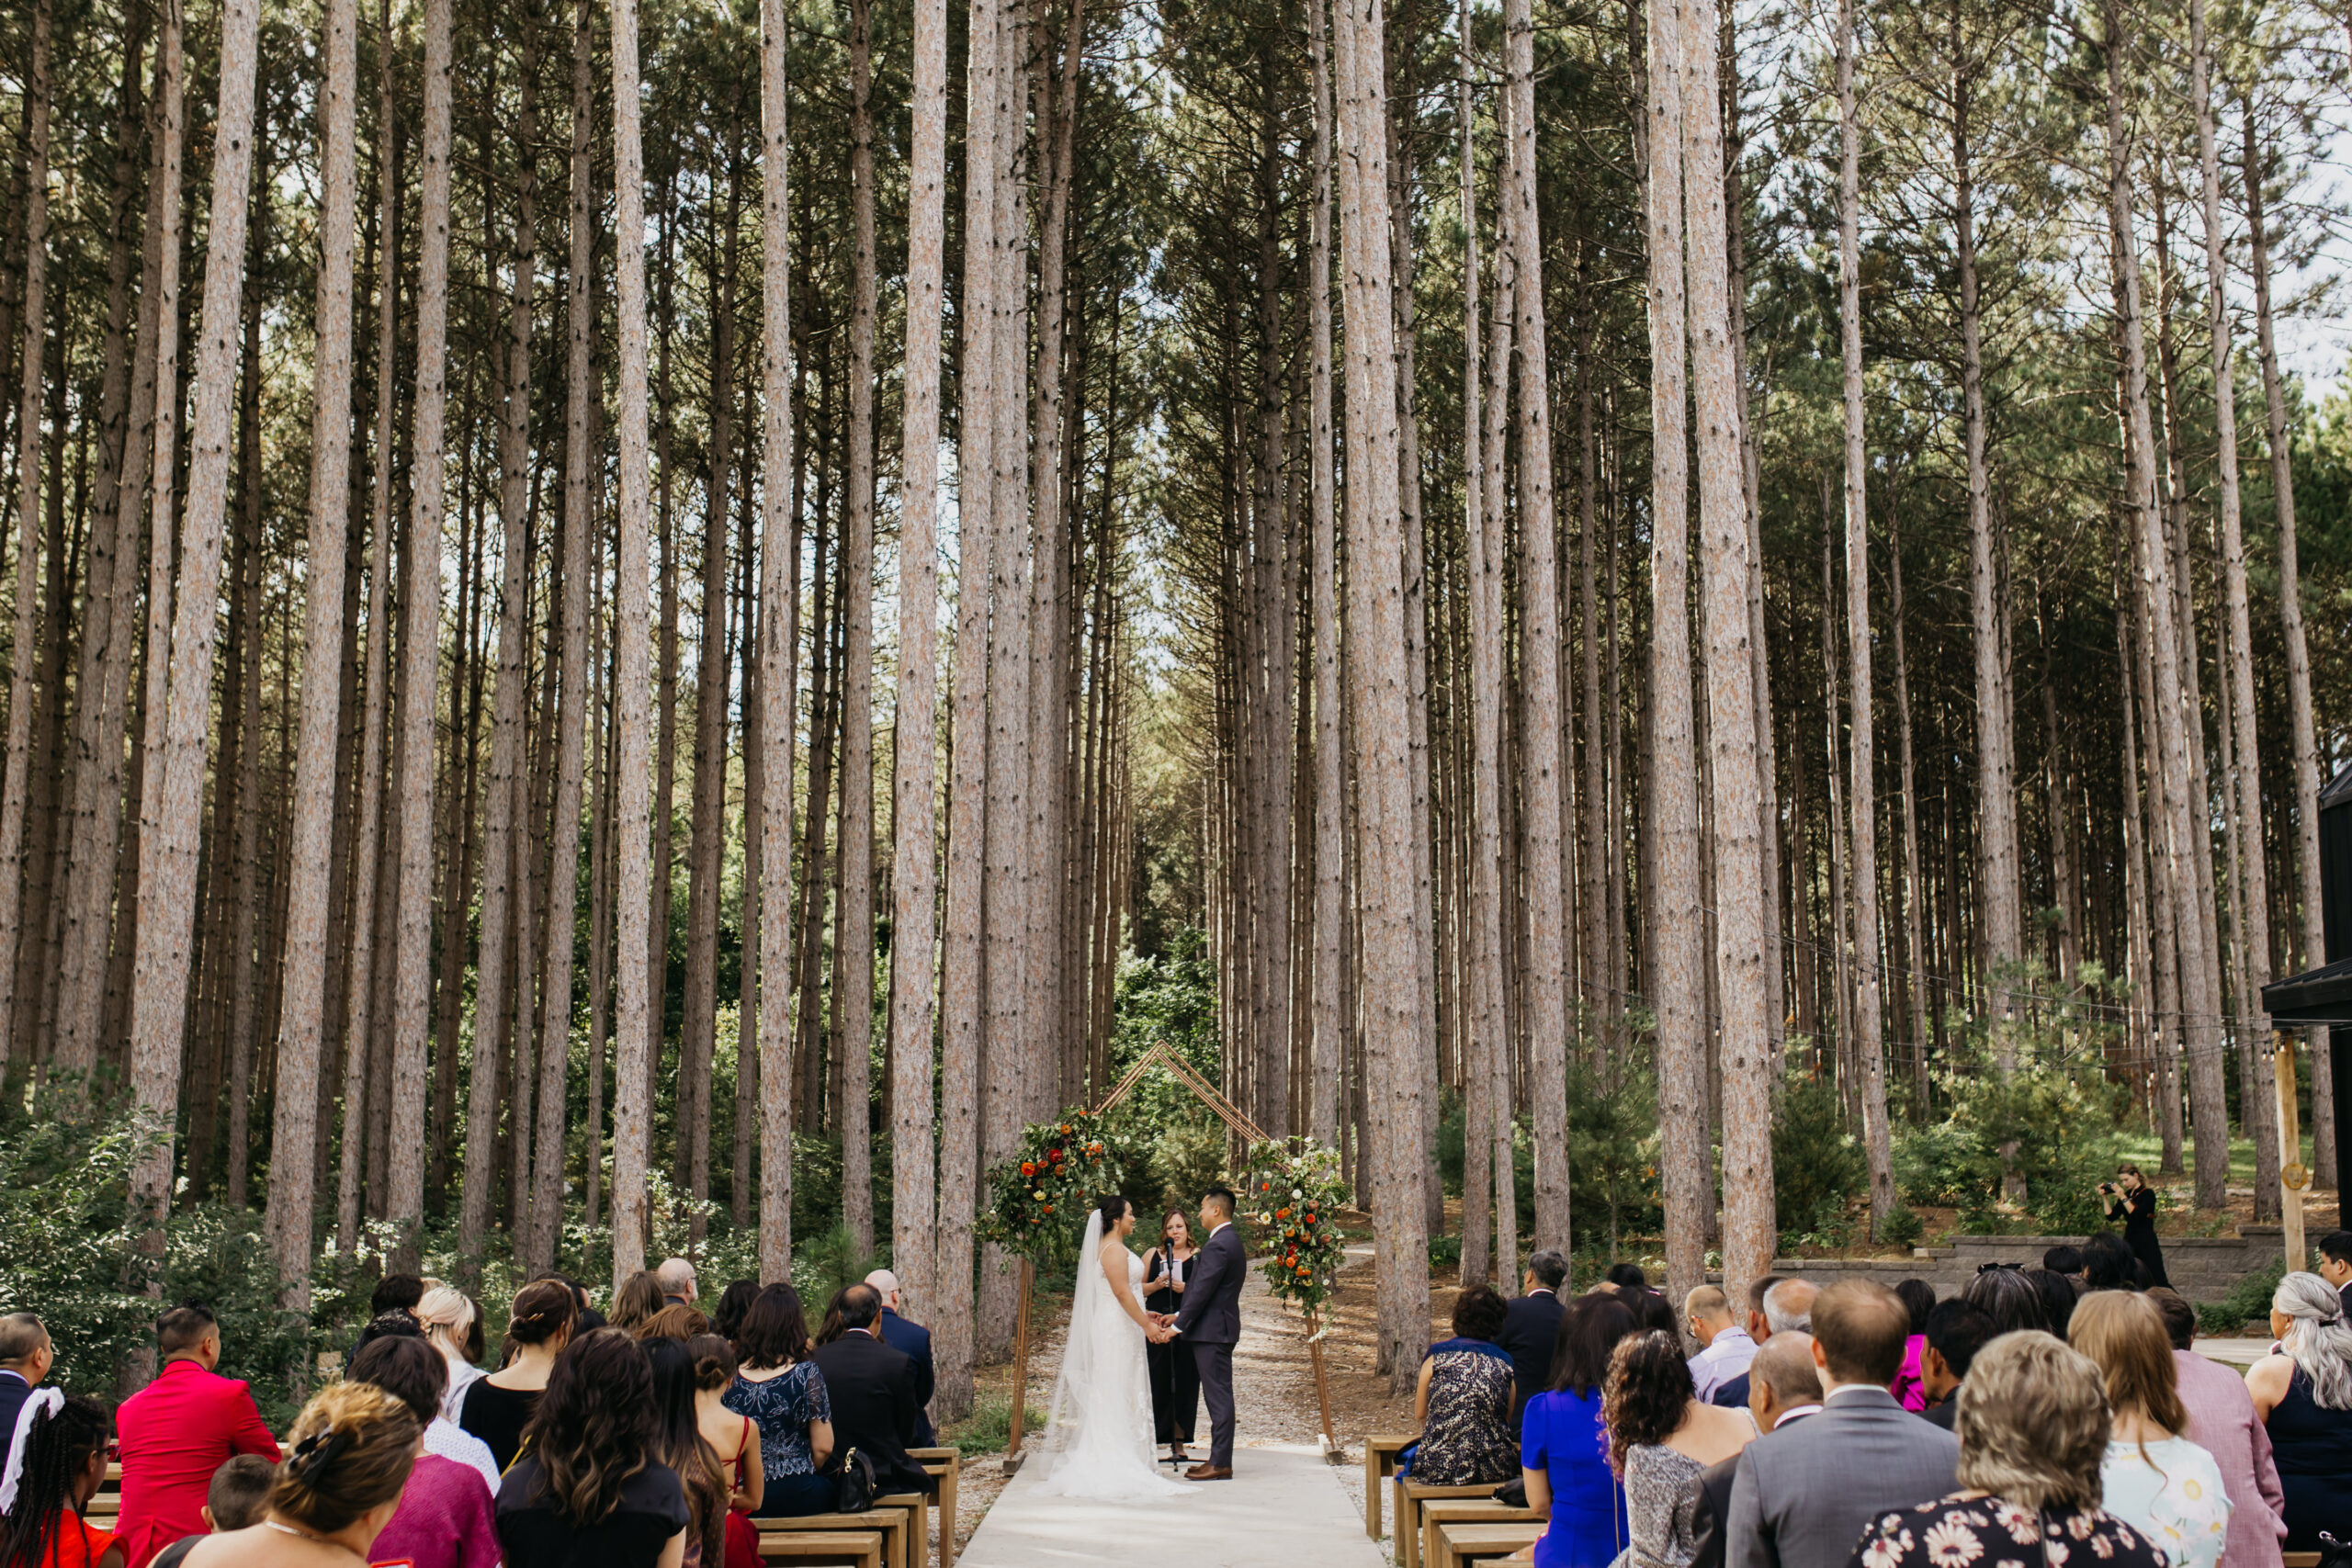 A wide view of the Pinewood wedding ceremony 